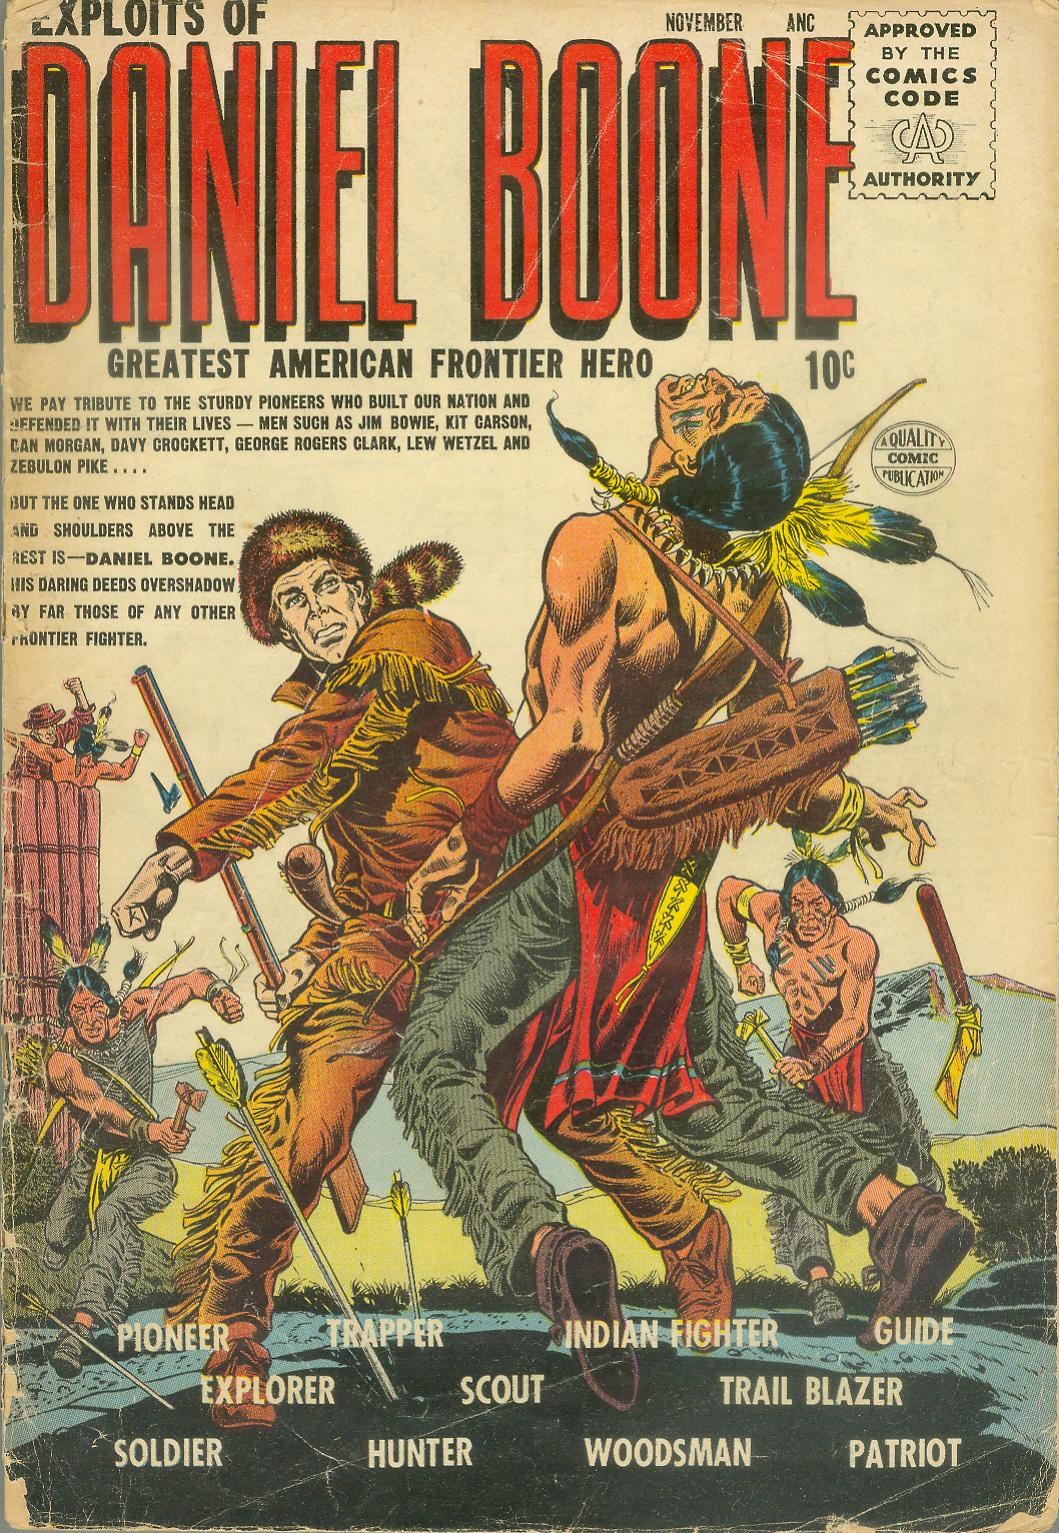 Read online Exploits of Daniel Boone comic -  Issue #1 - 1